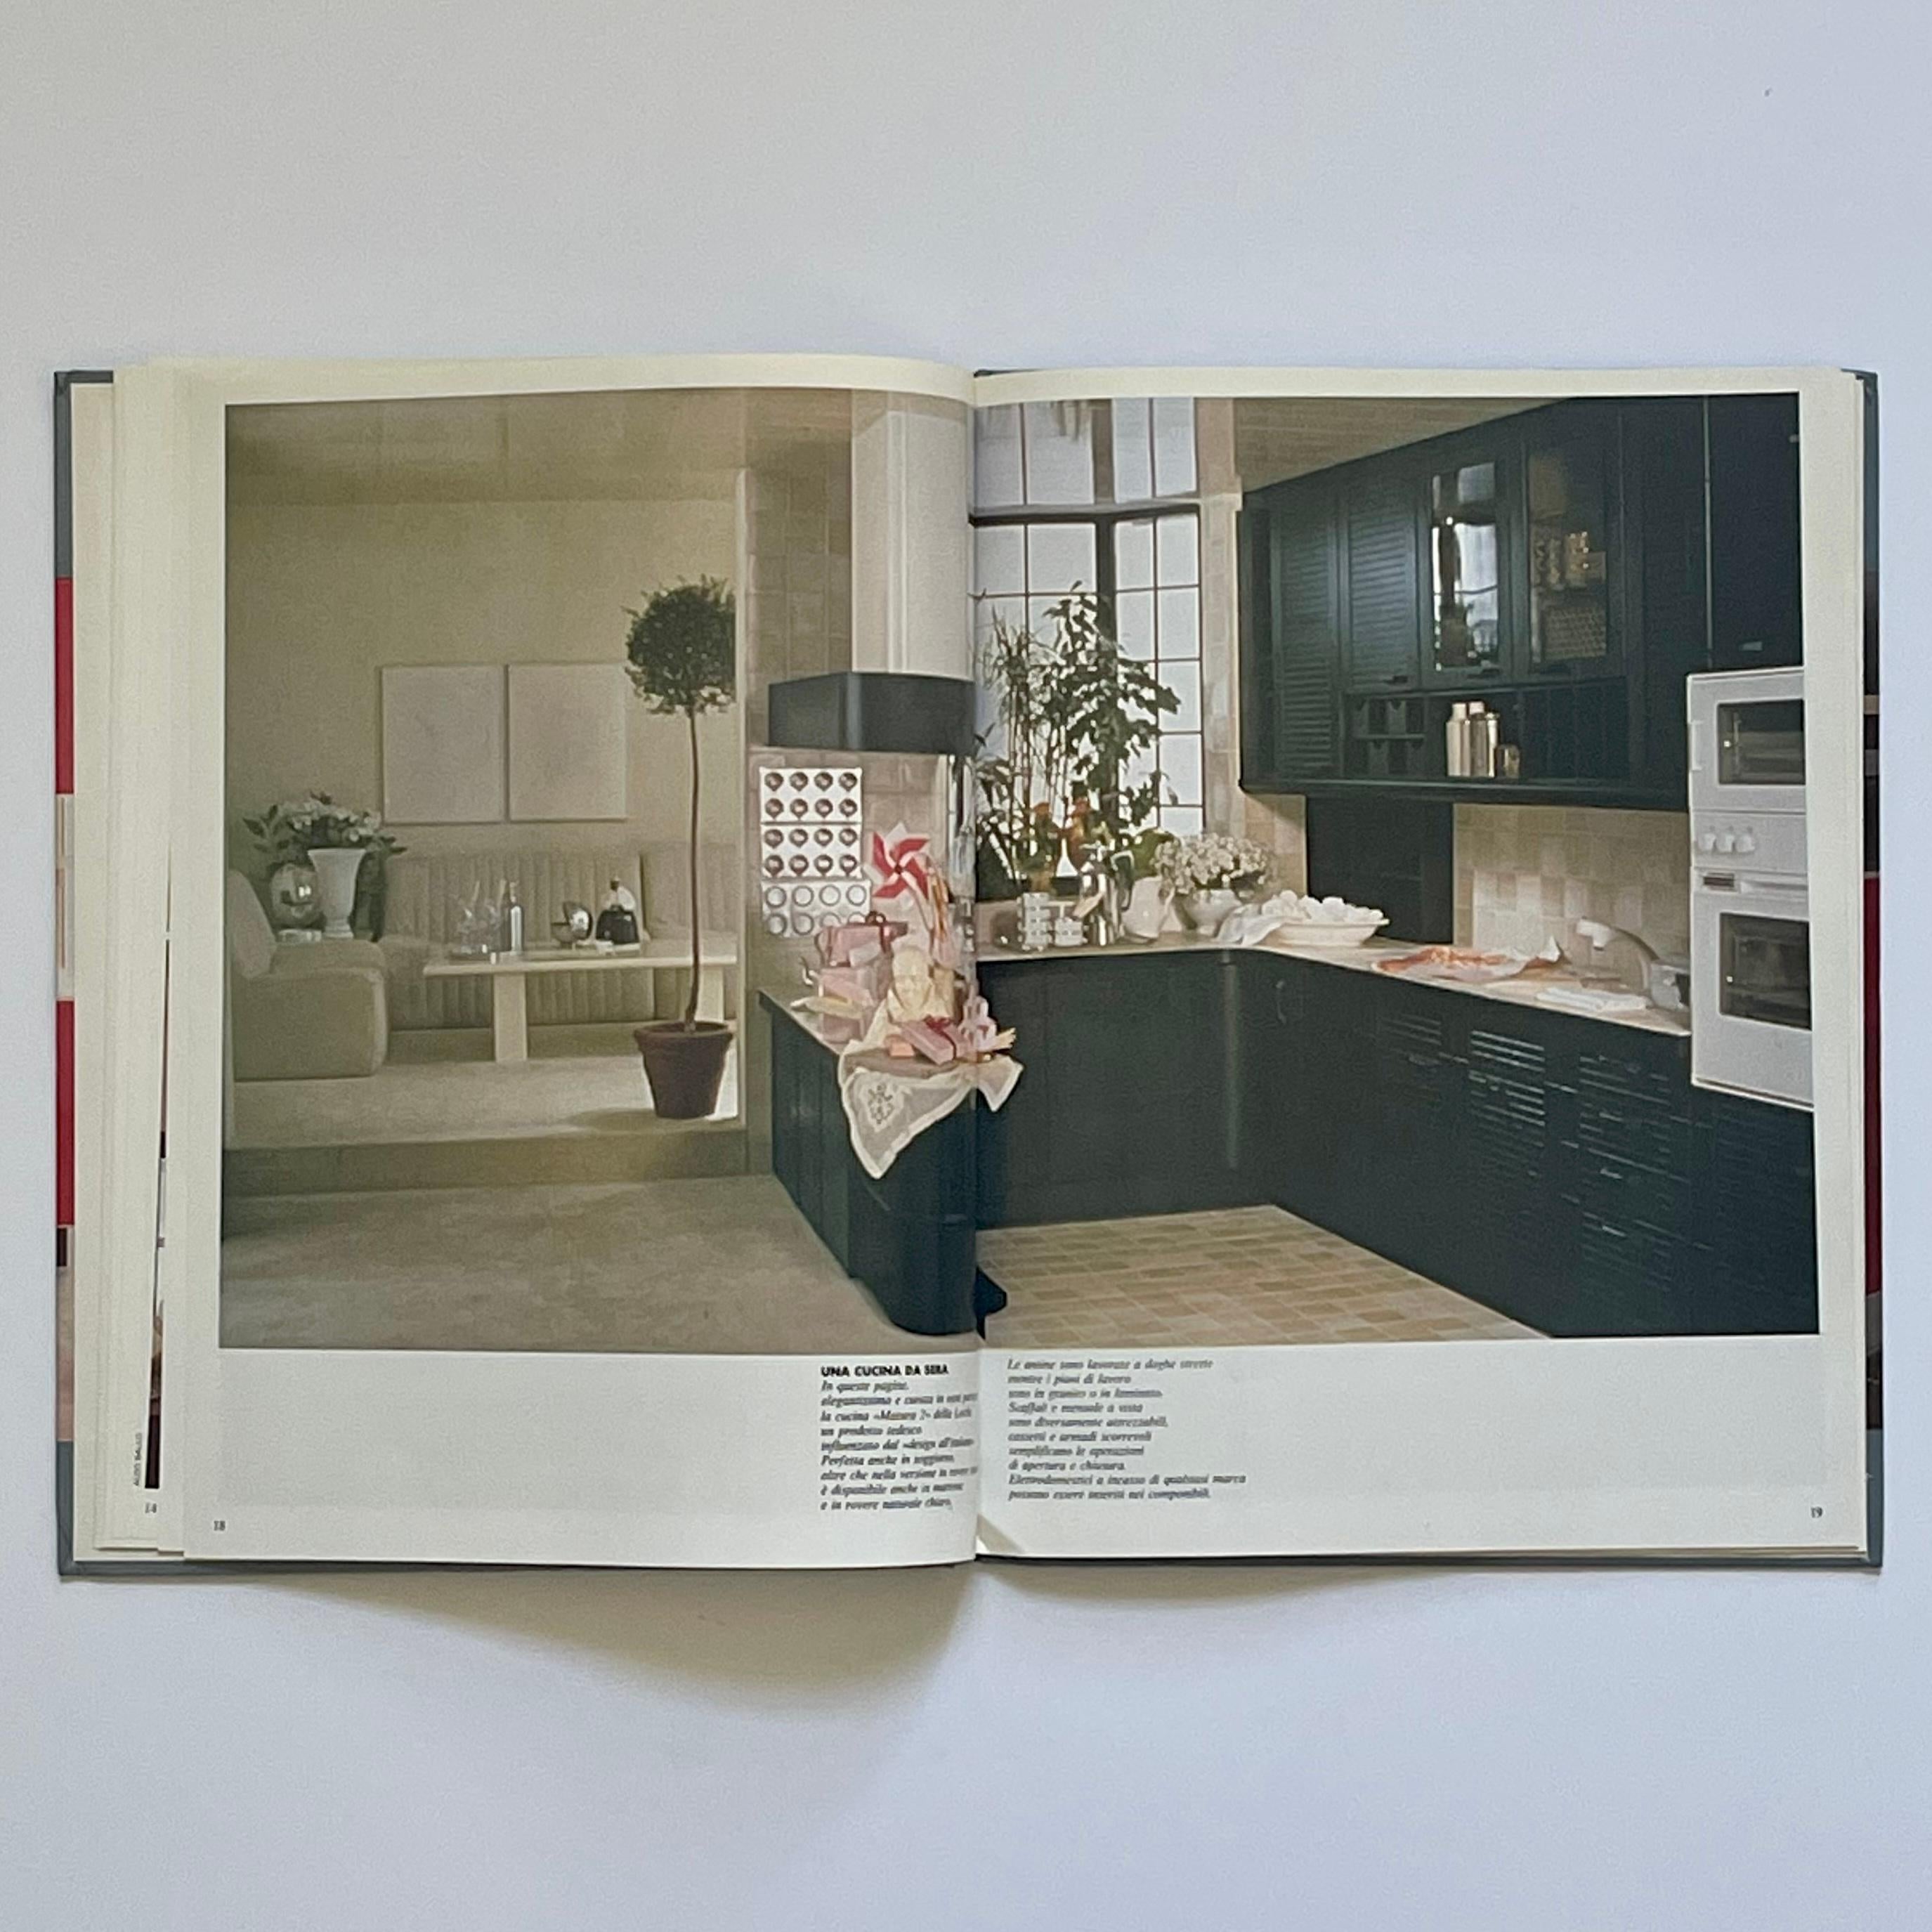 L’Ambiente Cucina.
Published by Casa Vogue, 1982, first edition. 
A spectacular reference book of kitchens published by one of the leading tastemakers of the late twentieth century, Casa Vogue. 
Bridging the gap between late 1970s opulence and